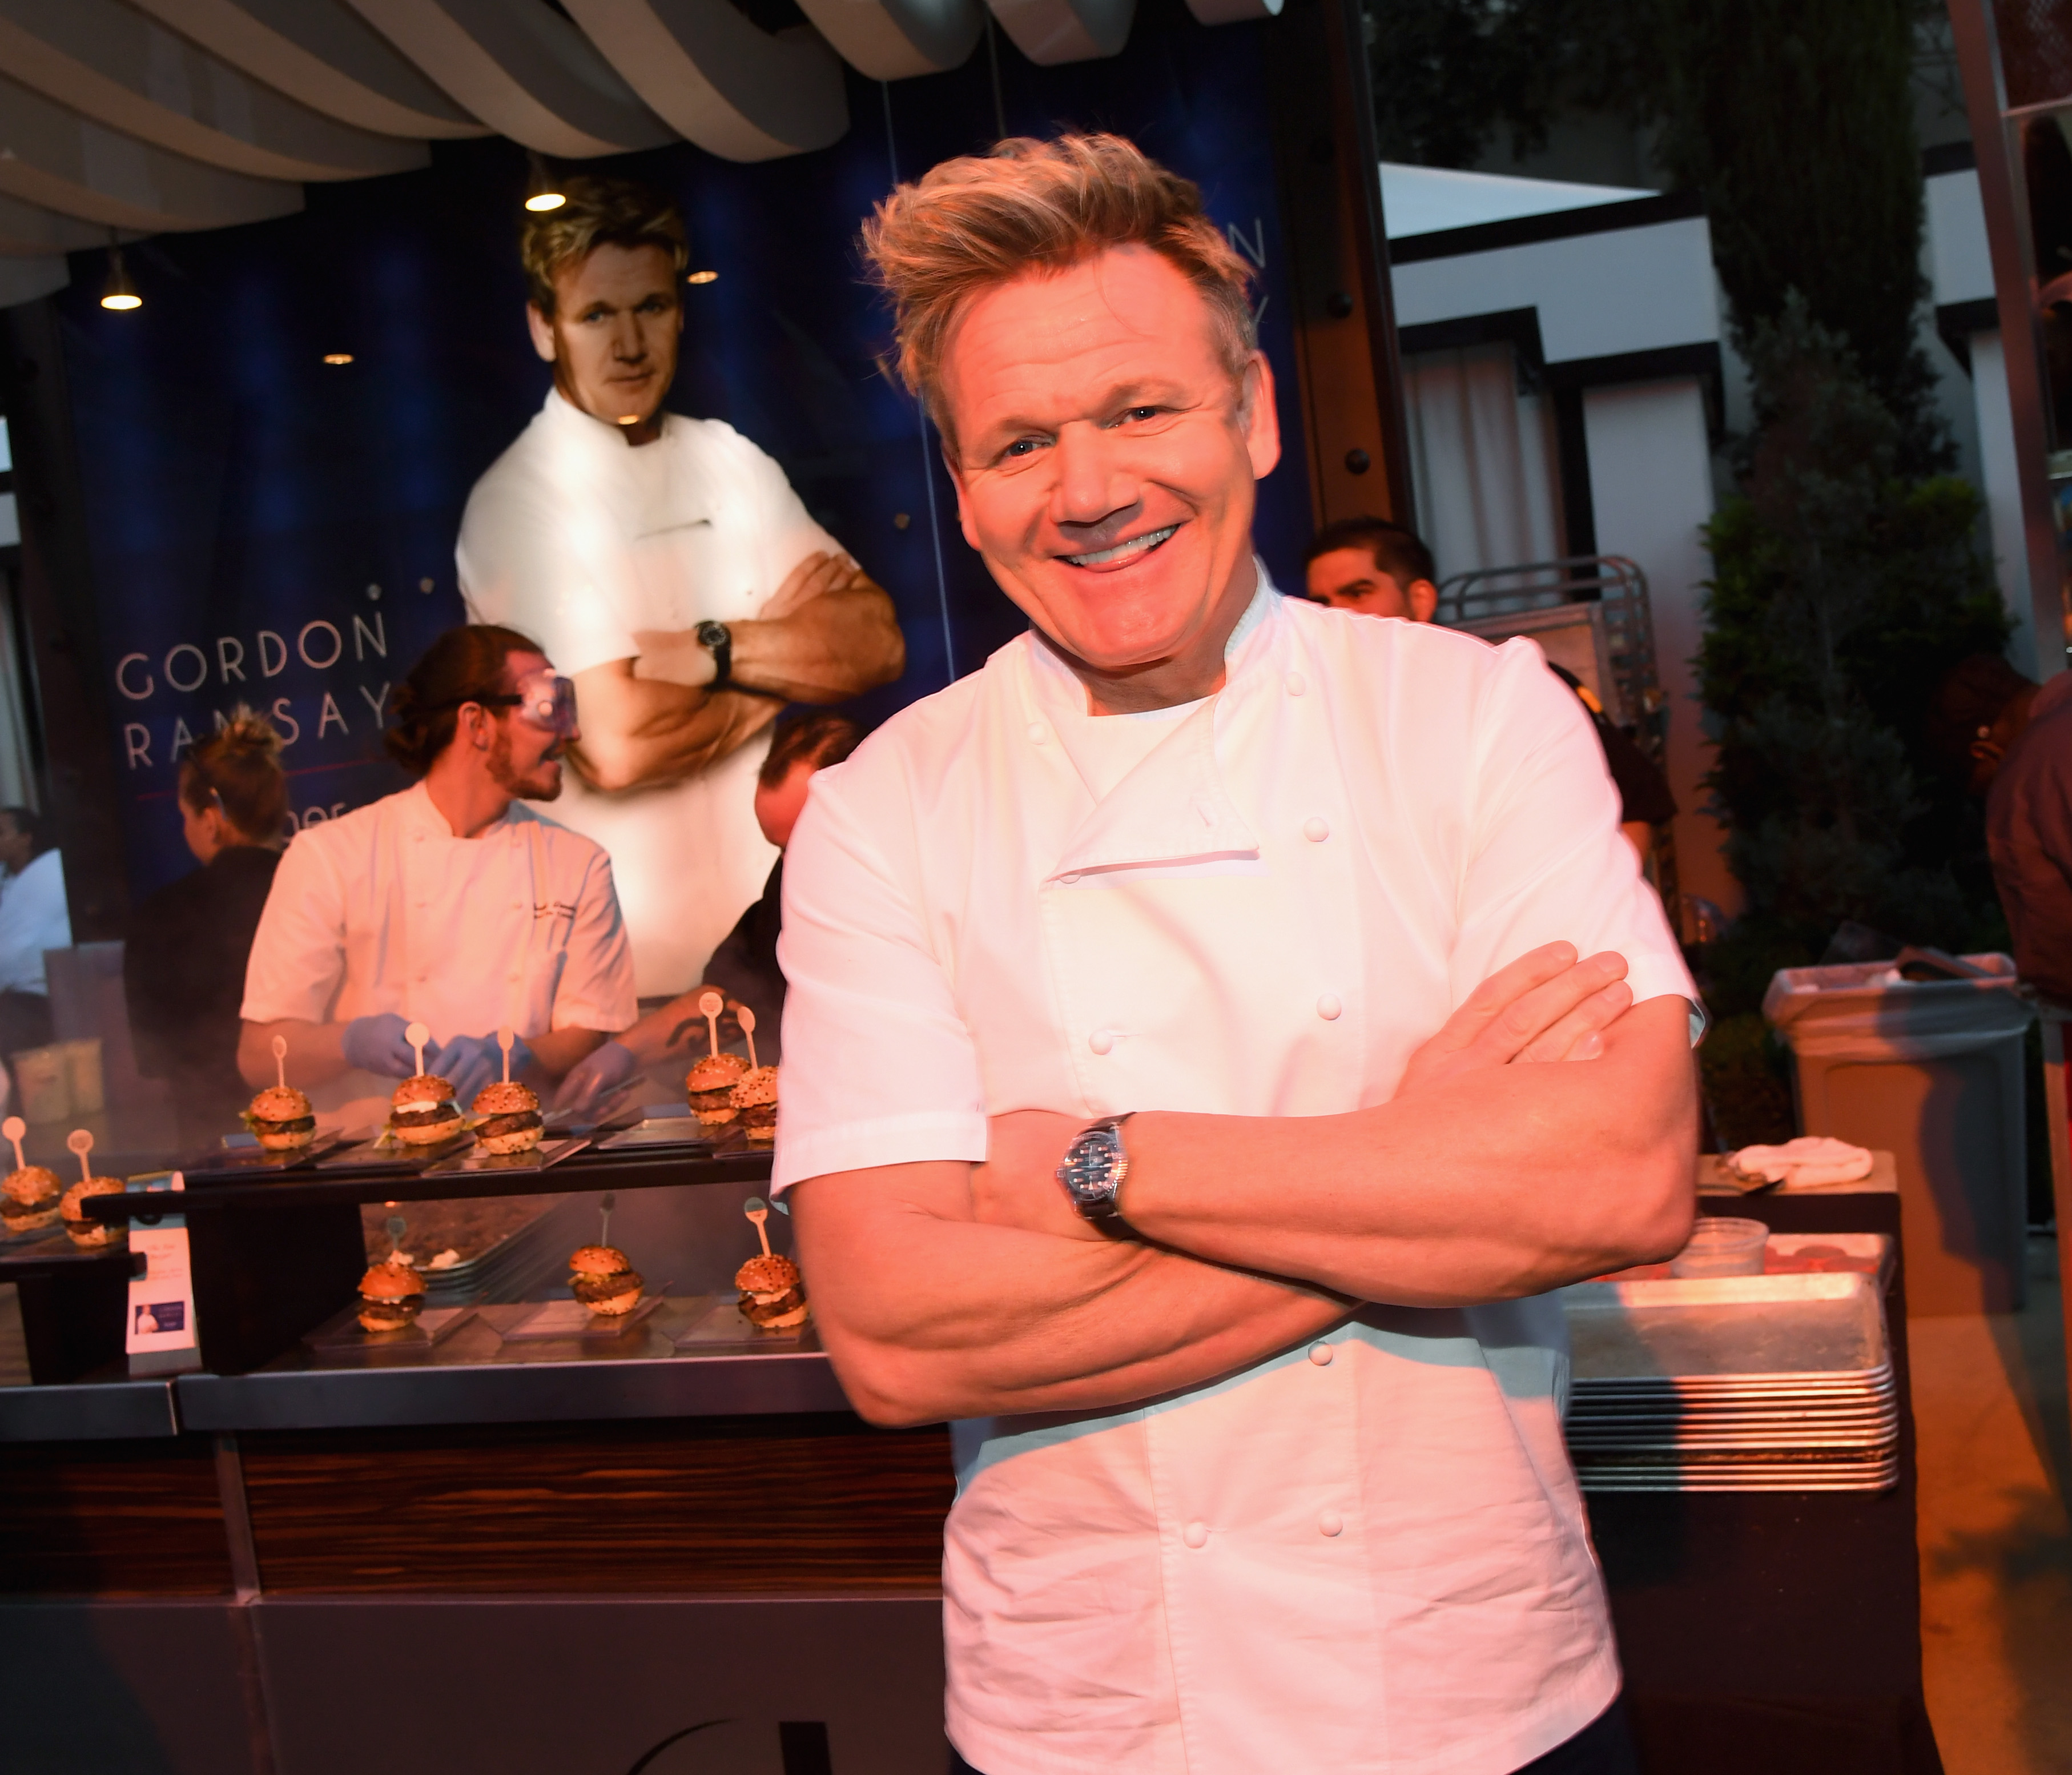 Gordon Ramsay Shares Video of Himself Naked in the Shower